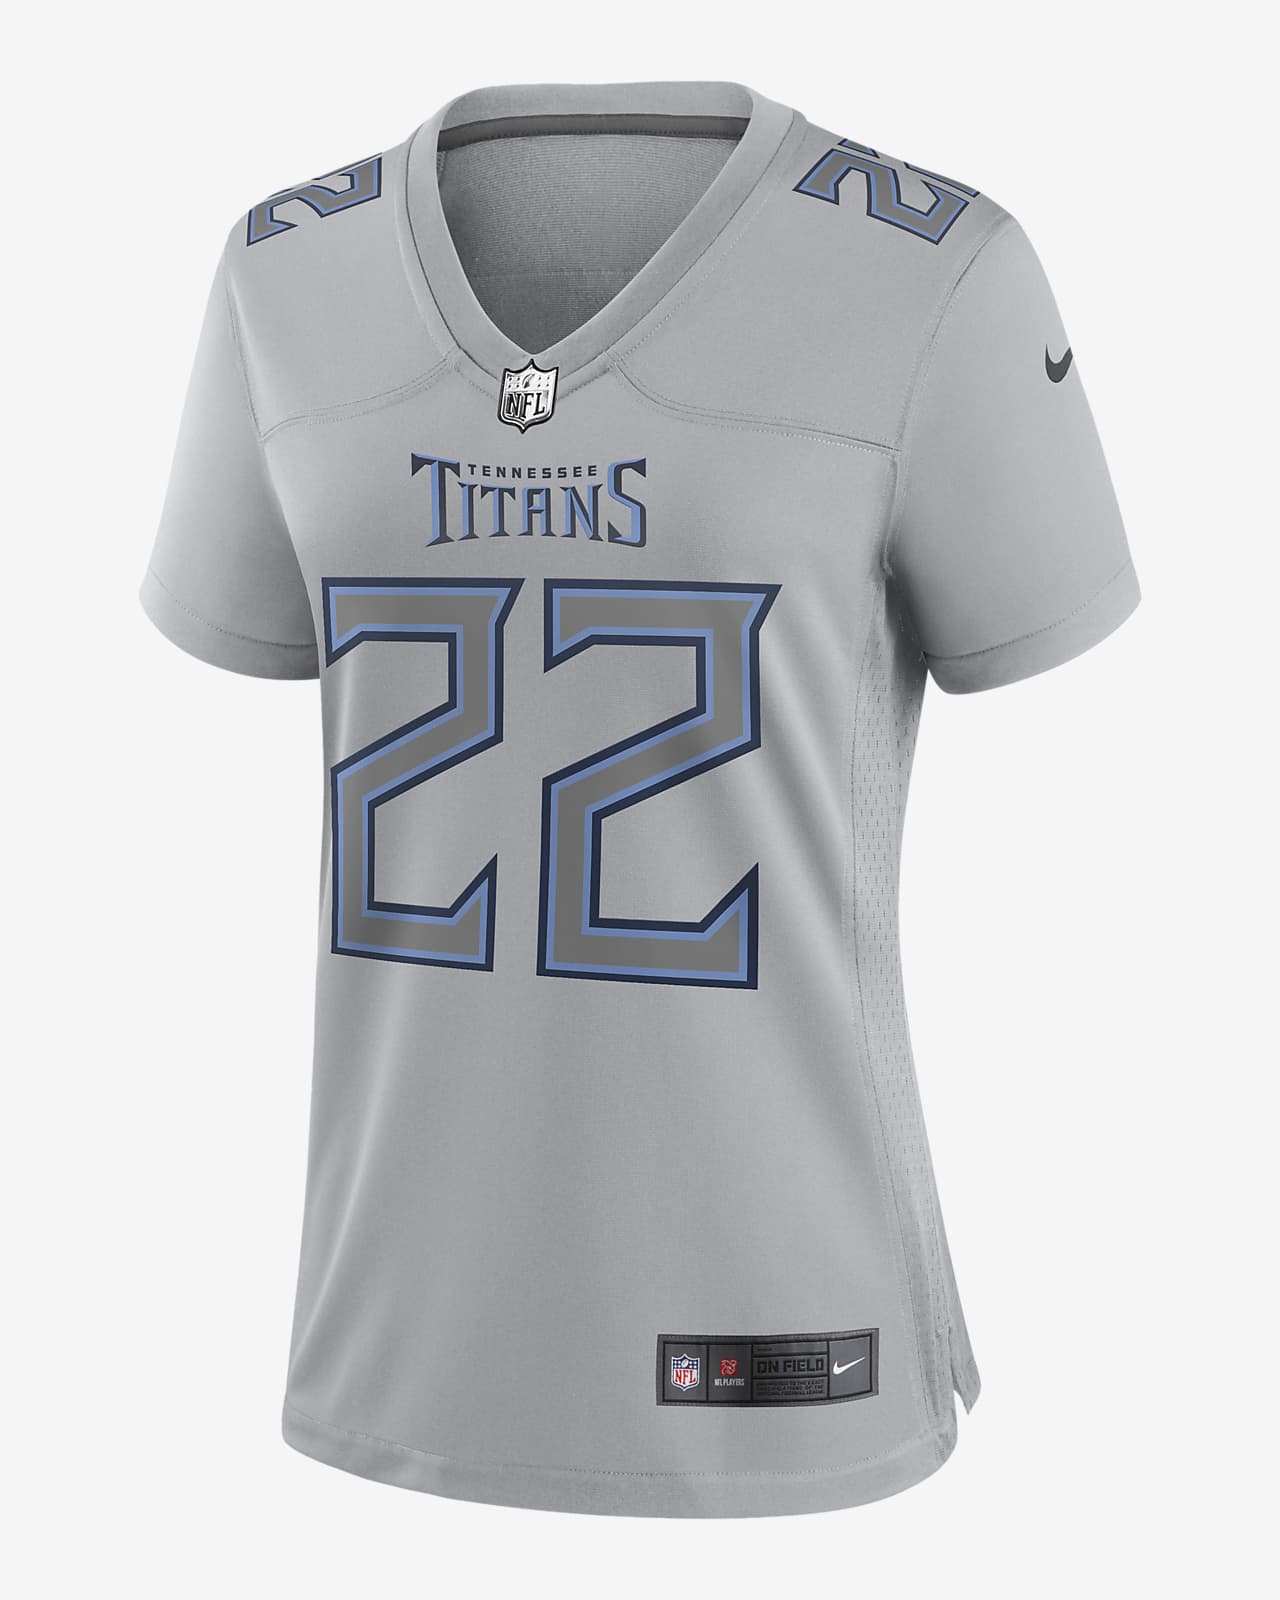 NFL Tennessee Titans Atmosphere (Derrick Henry) Women's Fashion Football Jersey